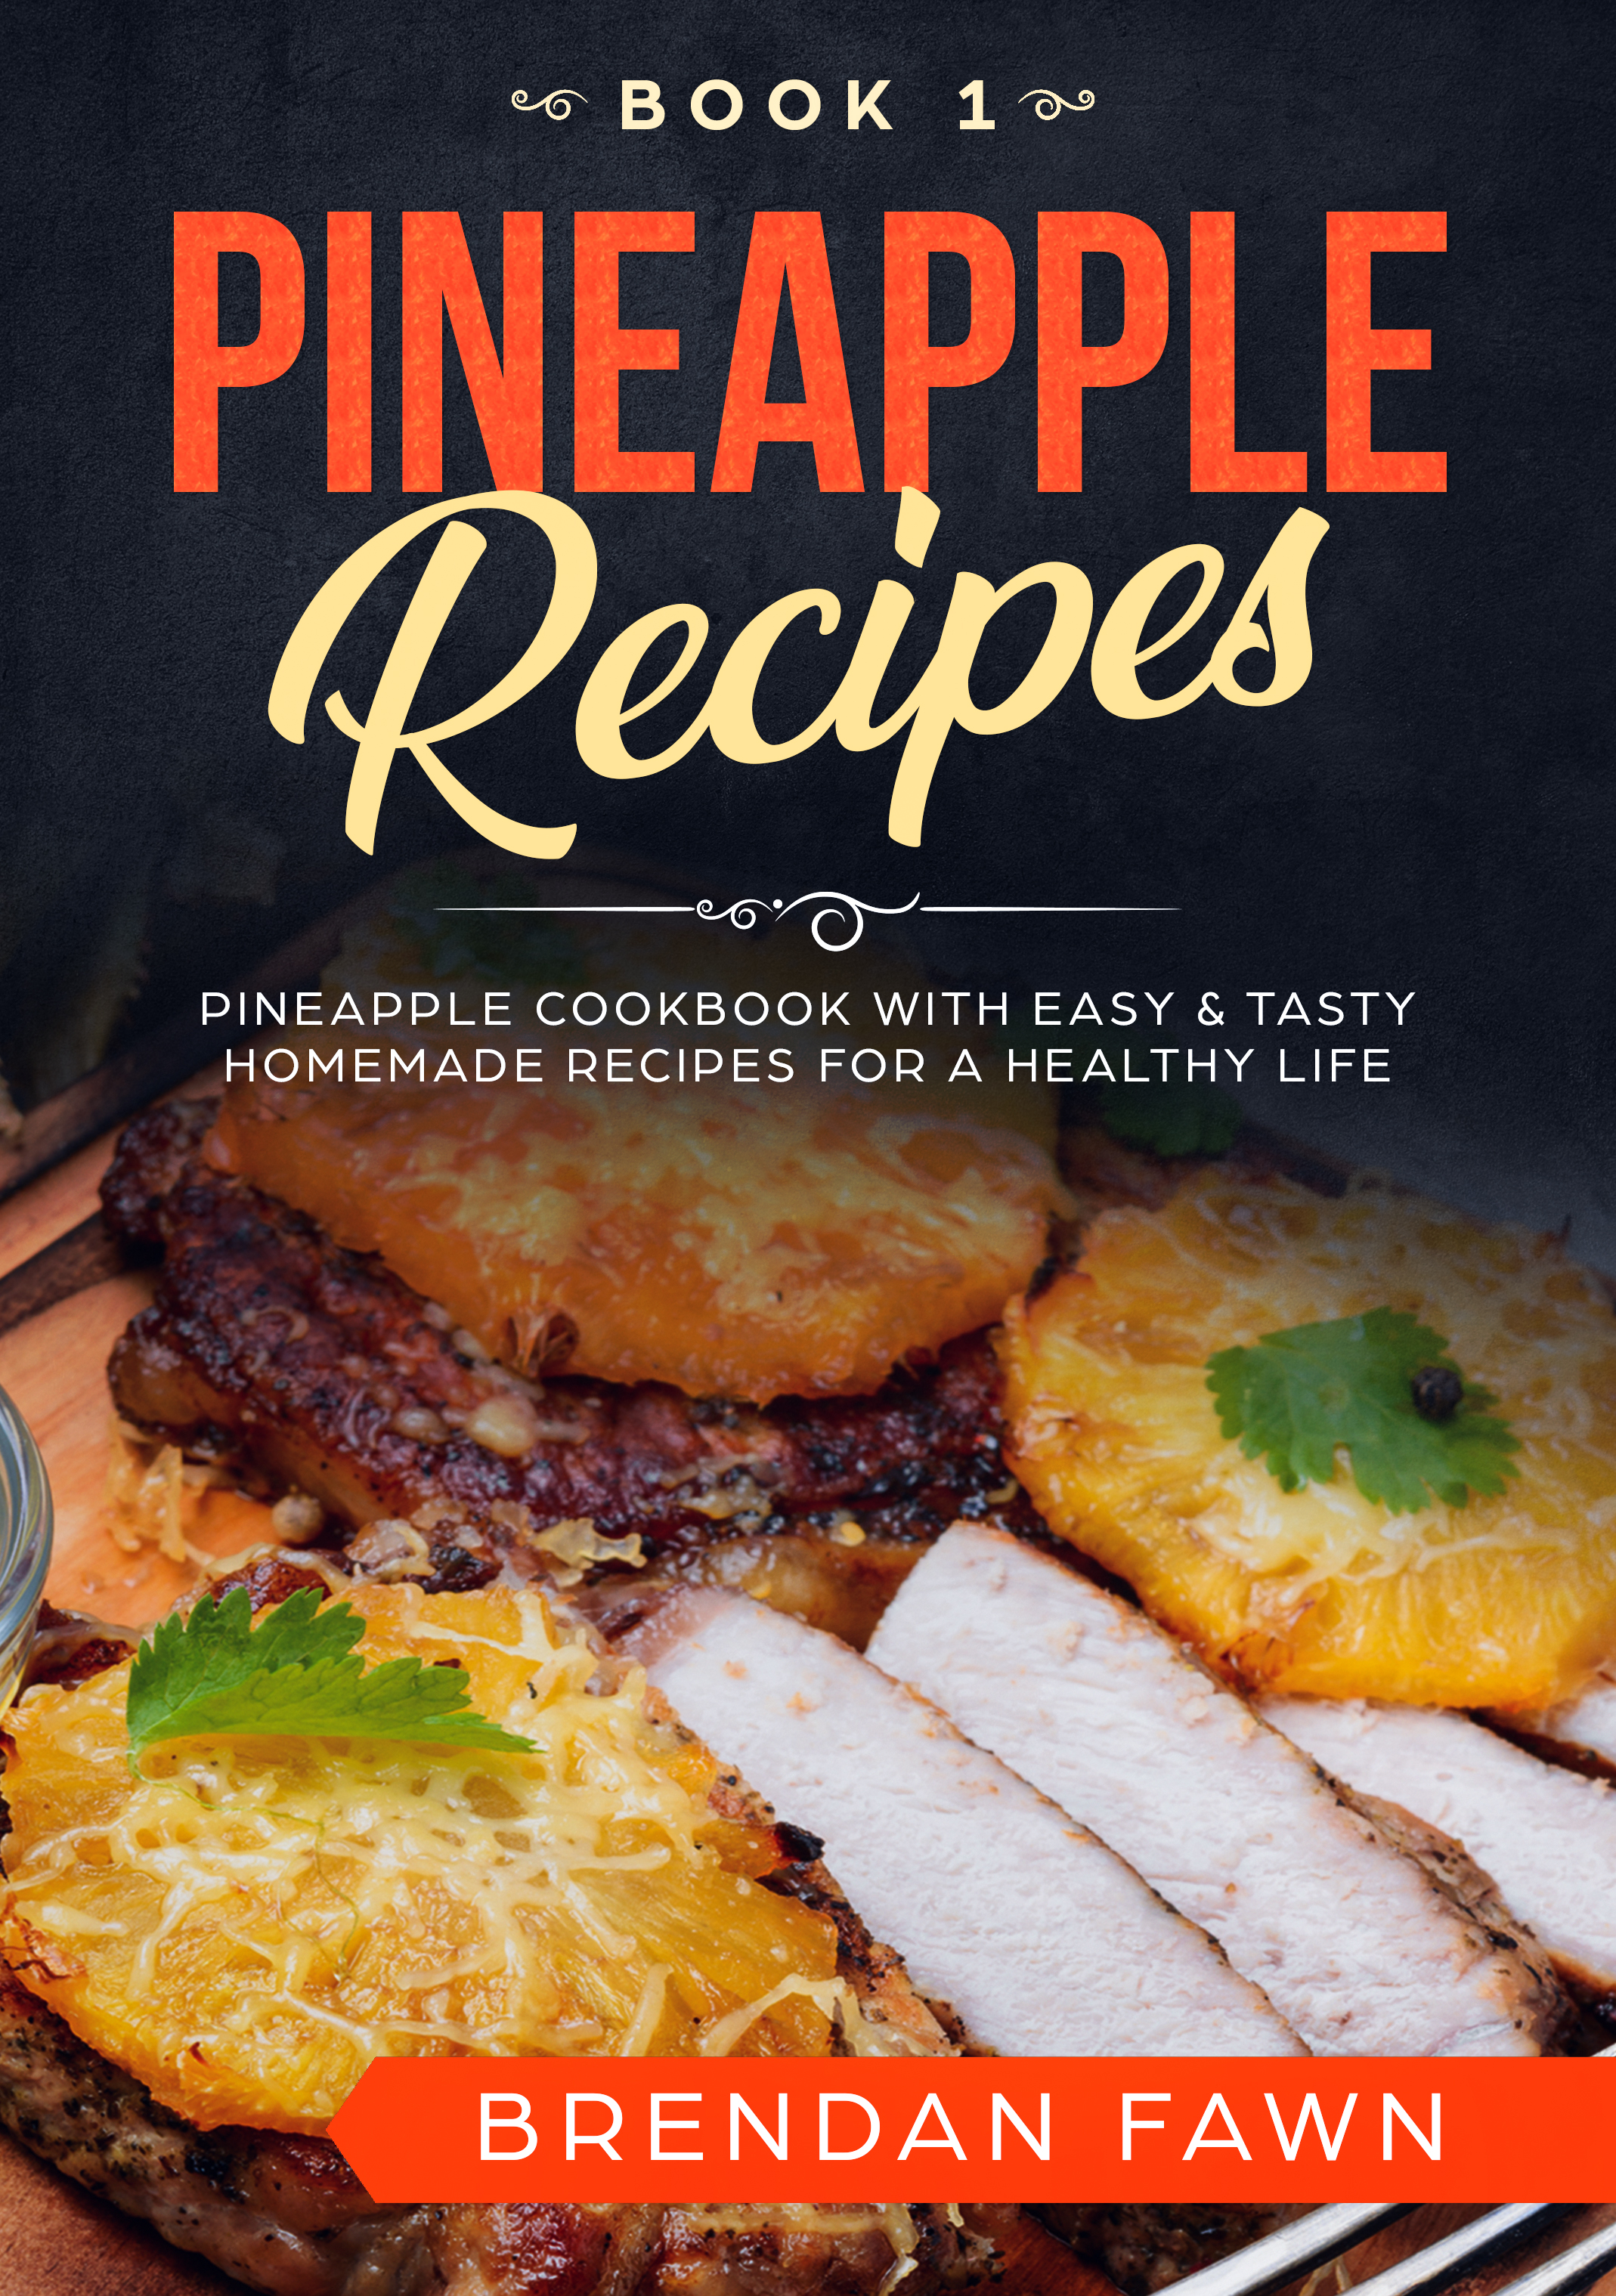 FREE: Pineapple Recipes: Pineapple Cookbook with Easy & Tasty Homemade Recipes for a Healthy Life by Brendan Fawn